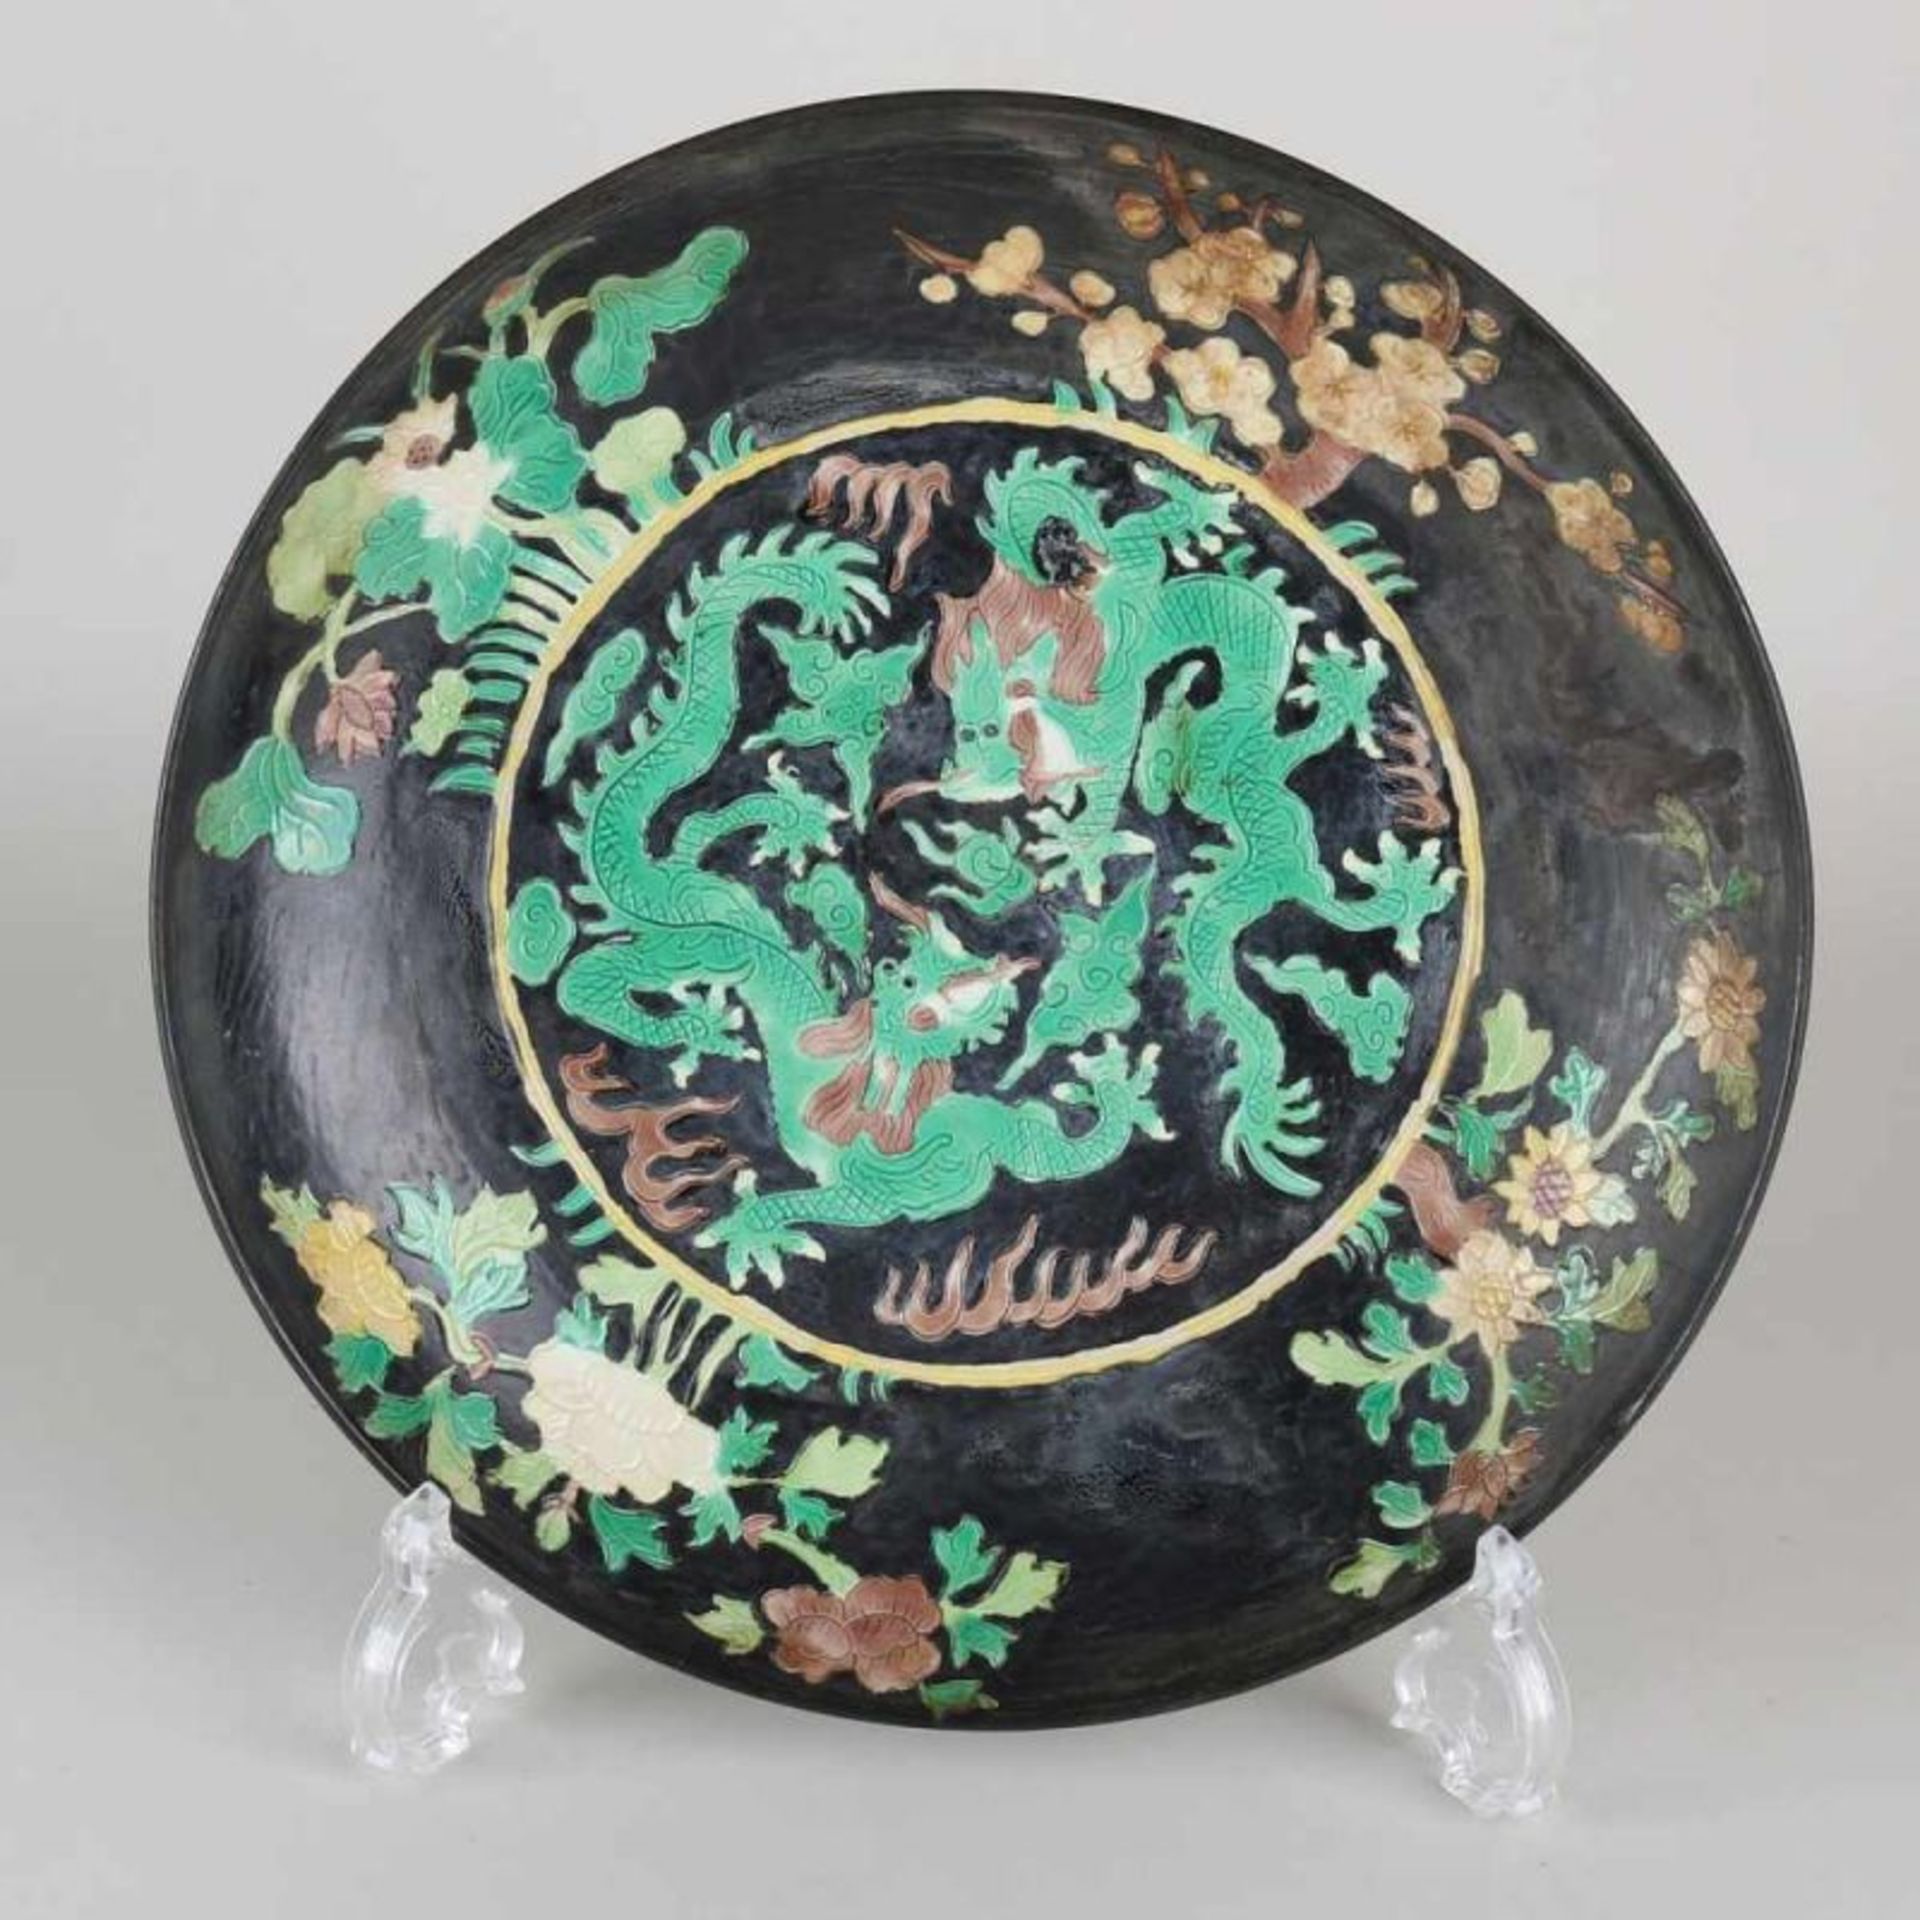 Chinese porcelain Kangxi labeled ornamental dish with floral decoration and dragons. 20th century.